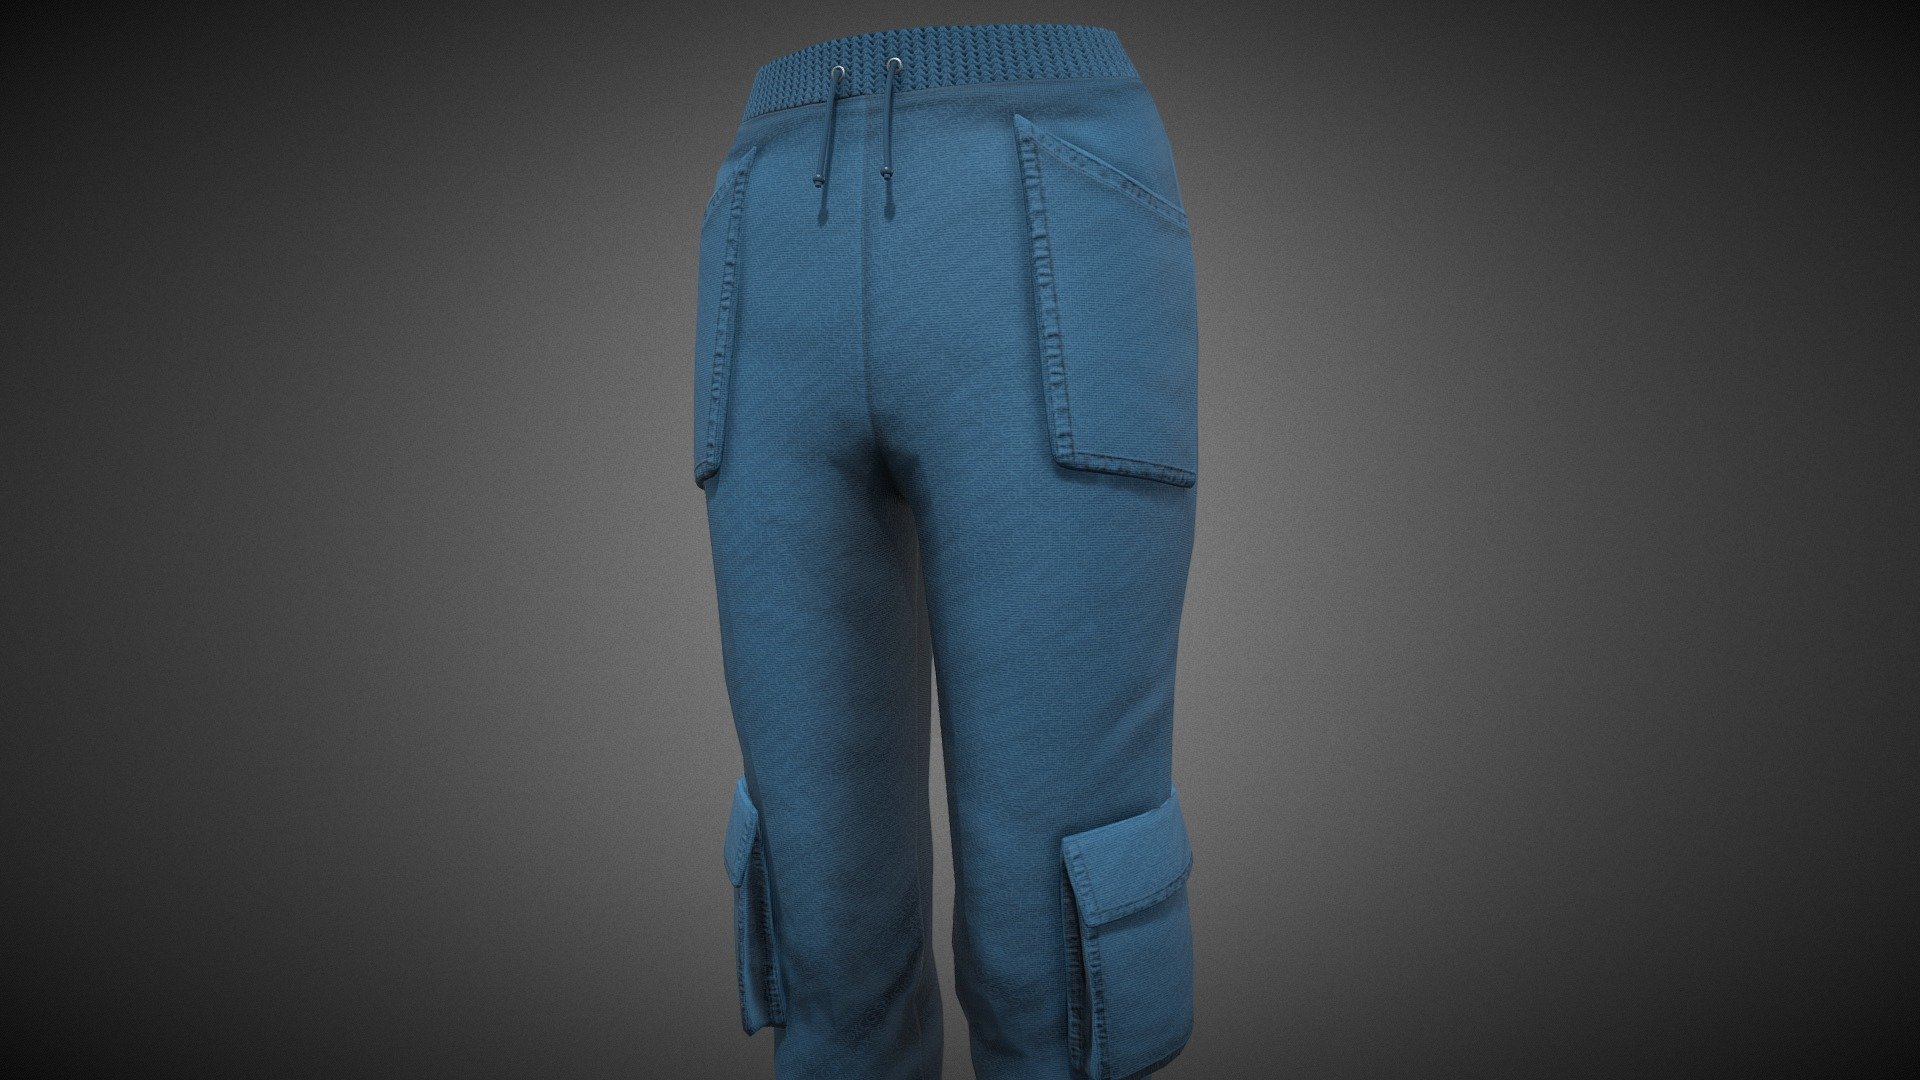 CG StudioX Present :
Blue Sport Pants Style 1 lowpoly/PBR


This is Blue Sport Pants Style 1 Comes with Specular and Metalness PBR.
The photo been rendered using Marmoset Toolbag 4 (real time game engine )

Features :

Comes with Specular and Metalness PBR 4K texture .
Good topology.
Low polygon geometry.
The Model is prefect for game for both Specular workflow as in Unity and Metalness as in Unreal engine .
The model also rendered using Marmoset Toolbag 4 with both Specular and Metalness PBR and also included in the product with the full texture.
The texture can be easily adjustable .

Texture :

One set of UV [Albedo -Normal-Metalness -Roughness-Gloss-Specular-Ao] (4096*4096)

Files :
Marmoset Toolbag 4 ,Maya,,FBX,glTF,Blender,OBj with all the textures.


Contact me for if you have any questions.
 - Blue Sport Pants Style 1 - Buy Royalty Free 3D model by CG StudioX (@CG_StudioX) 3d model